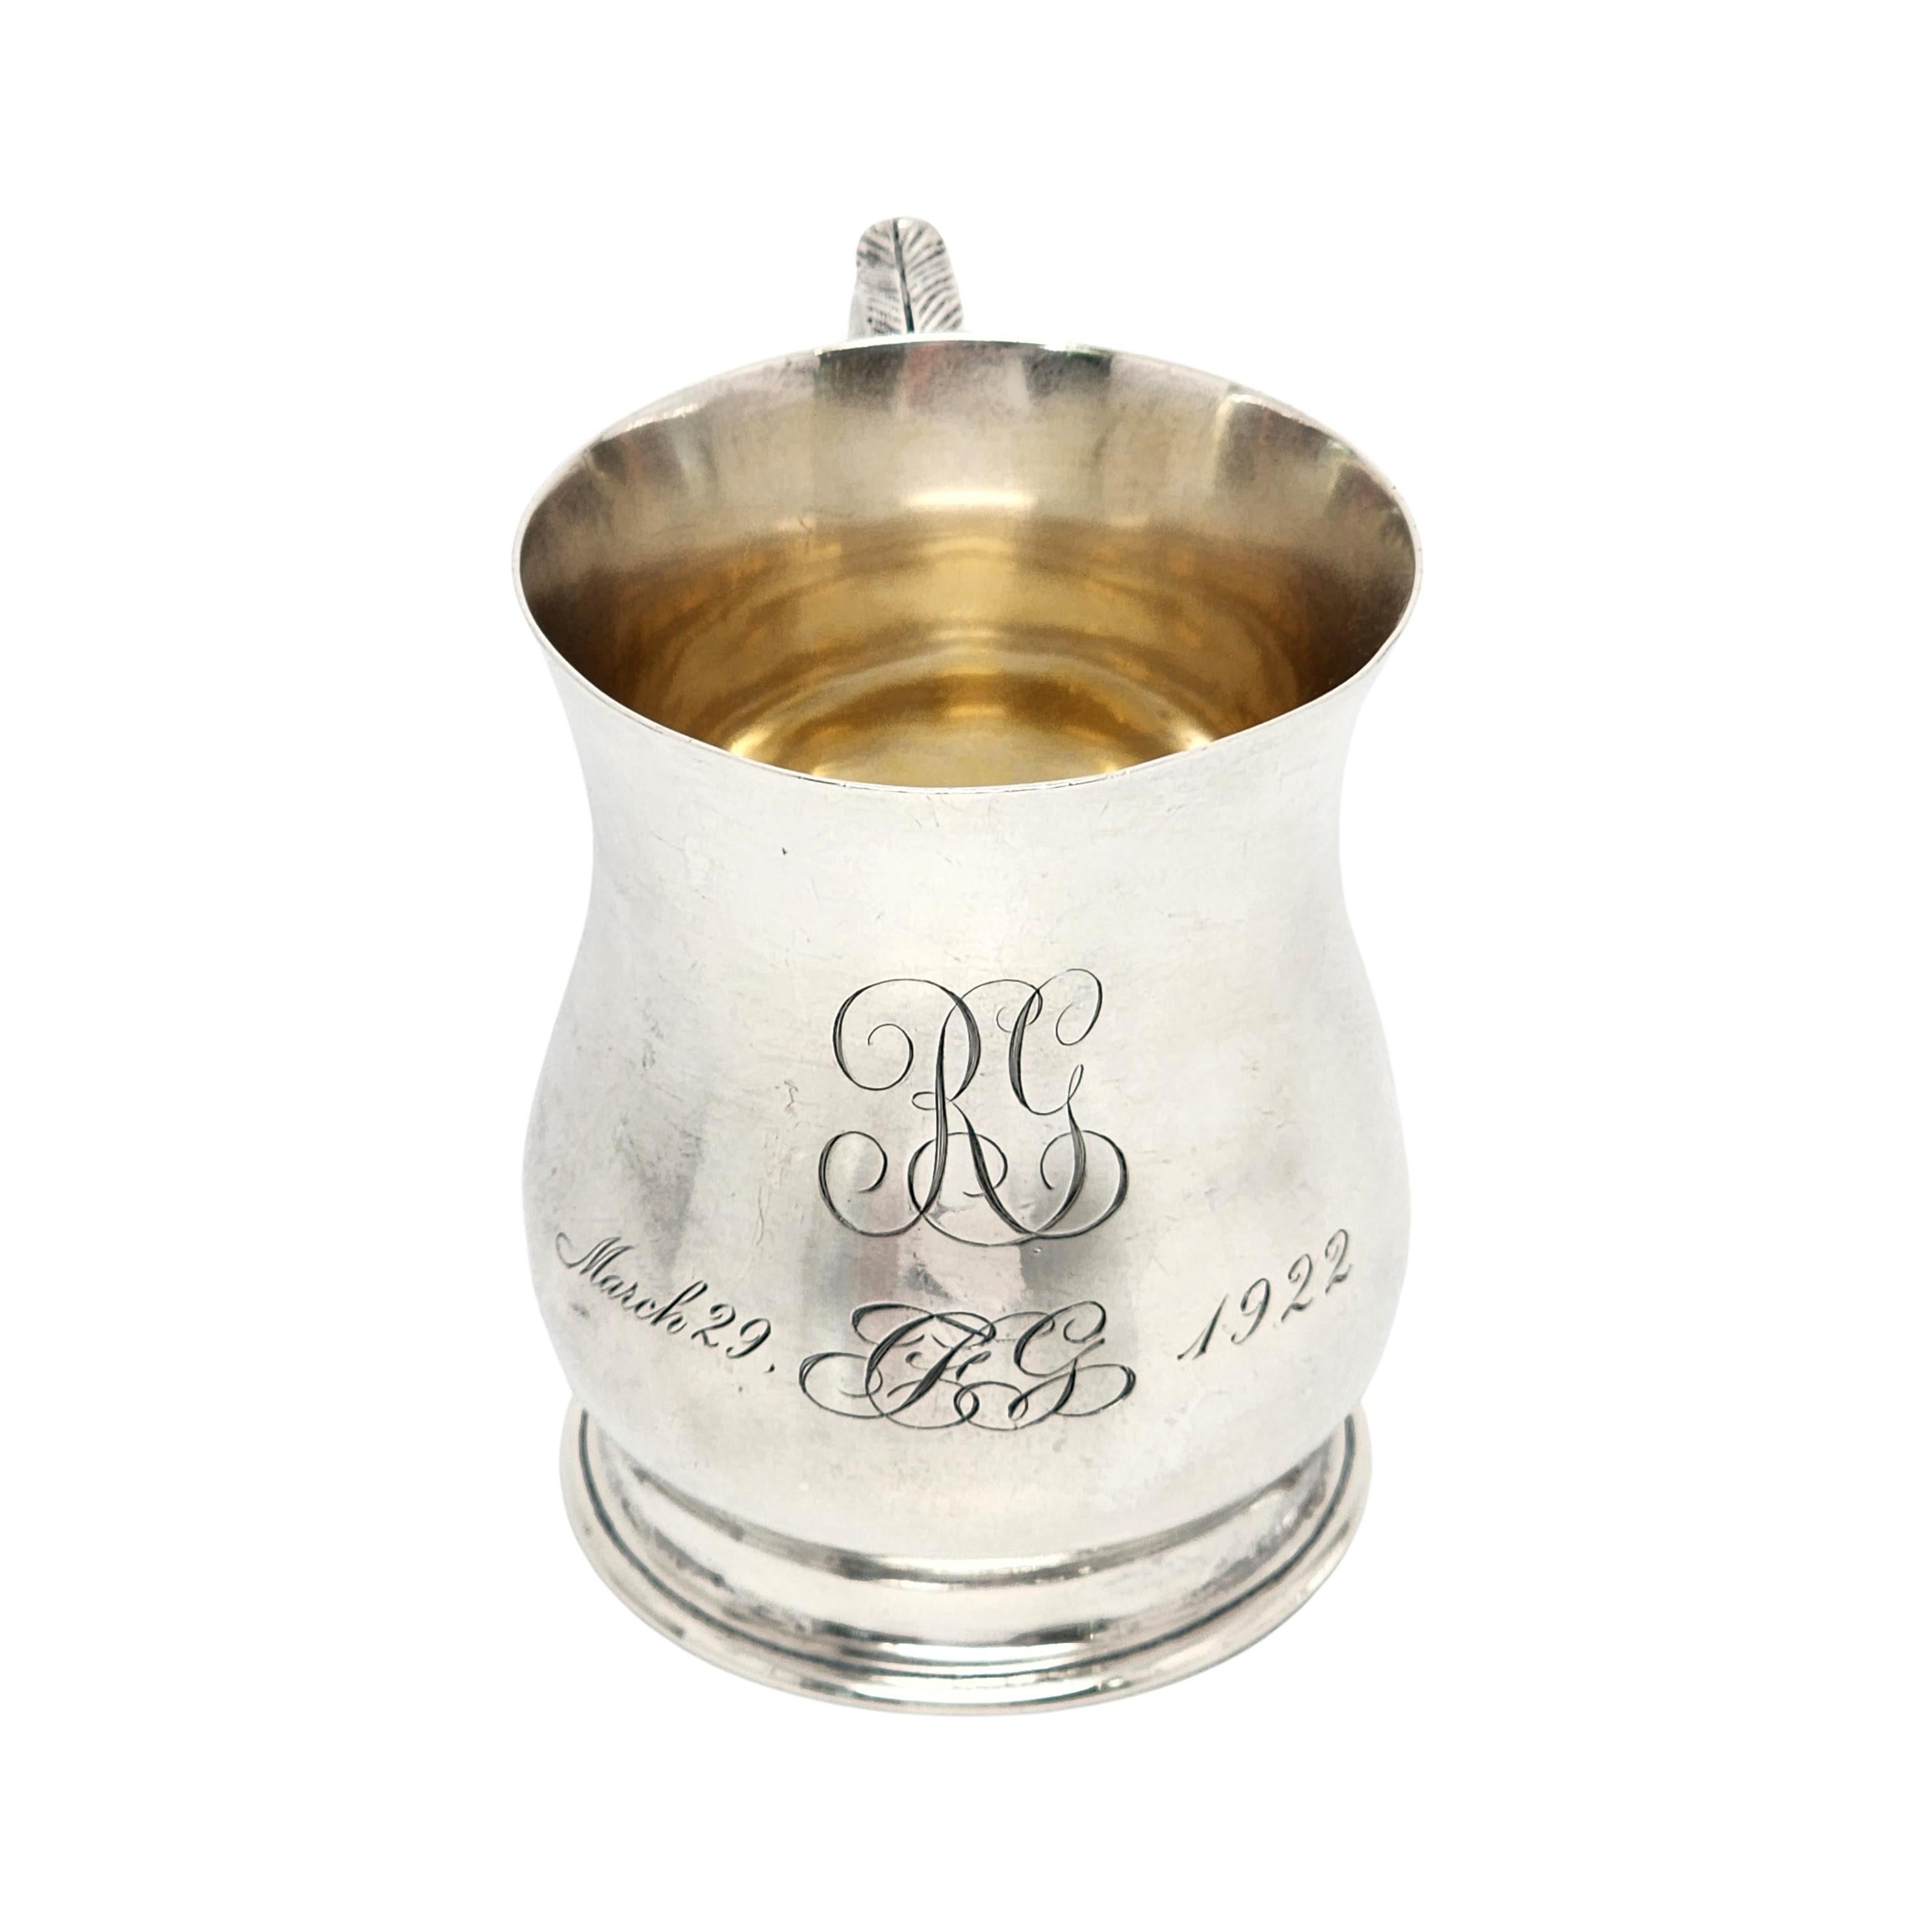 Tiffany & Co sterling silver tankard cup/mug with monogram and engraving.

Monogram appears to be RG with engraving March 29 CFG 1922

This traditional tankard features a traditional Georgian style body with a scroll handle topped with a feather